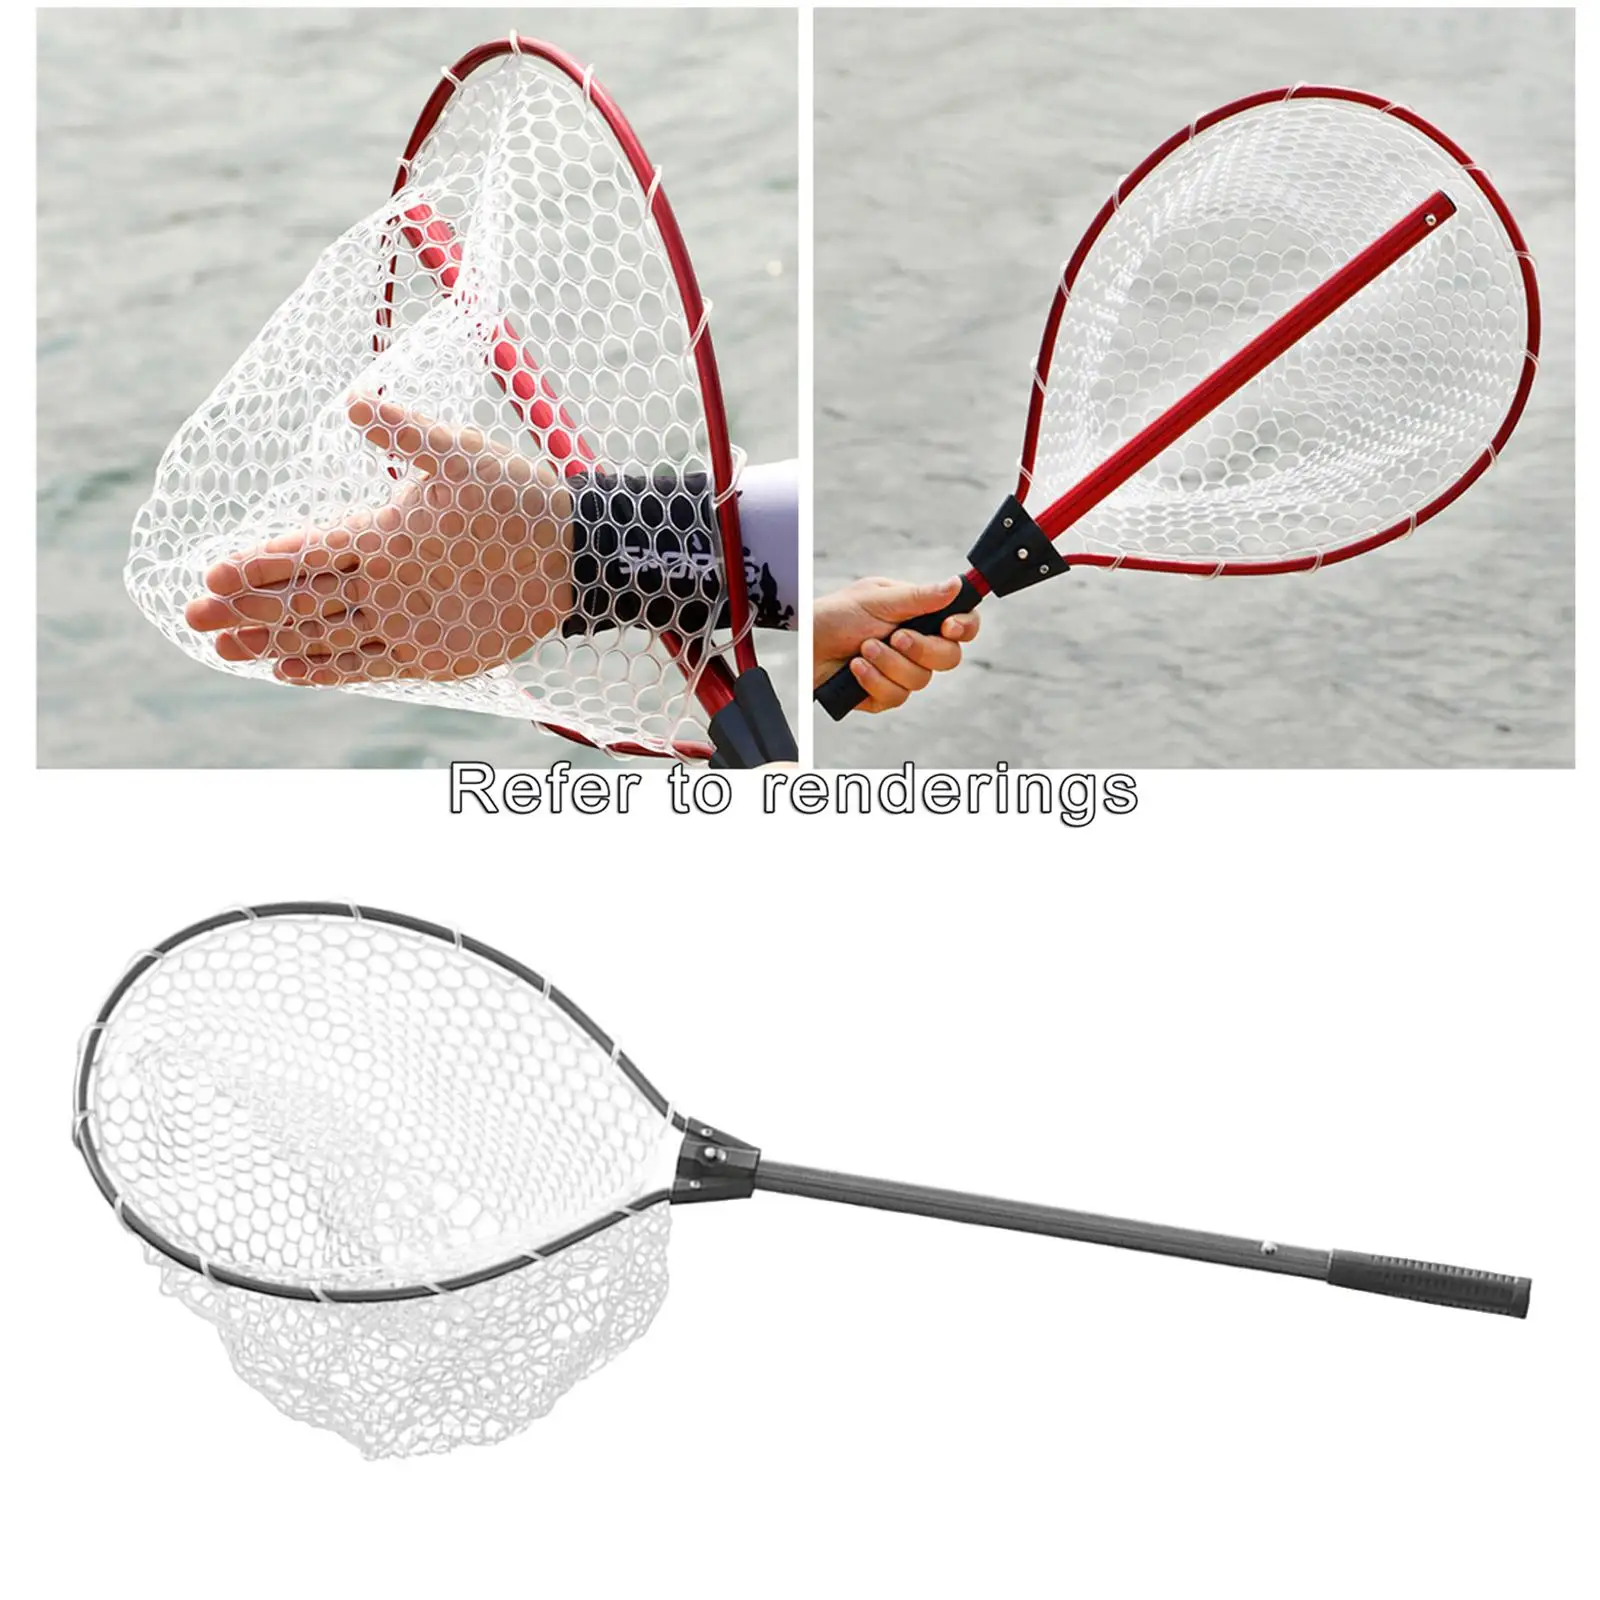 https://ae01.alicdn.com/kf/Sd3296f911a36455a941f957447a45e90L/Folding-Foldable-Fish-Landing-Net-Aluminum-Telescopic-Pole-Handle-and-Silicone-Mesh-12-6inch-Hoop-Size.jpg